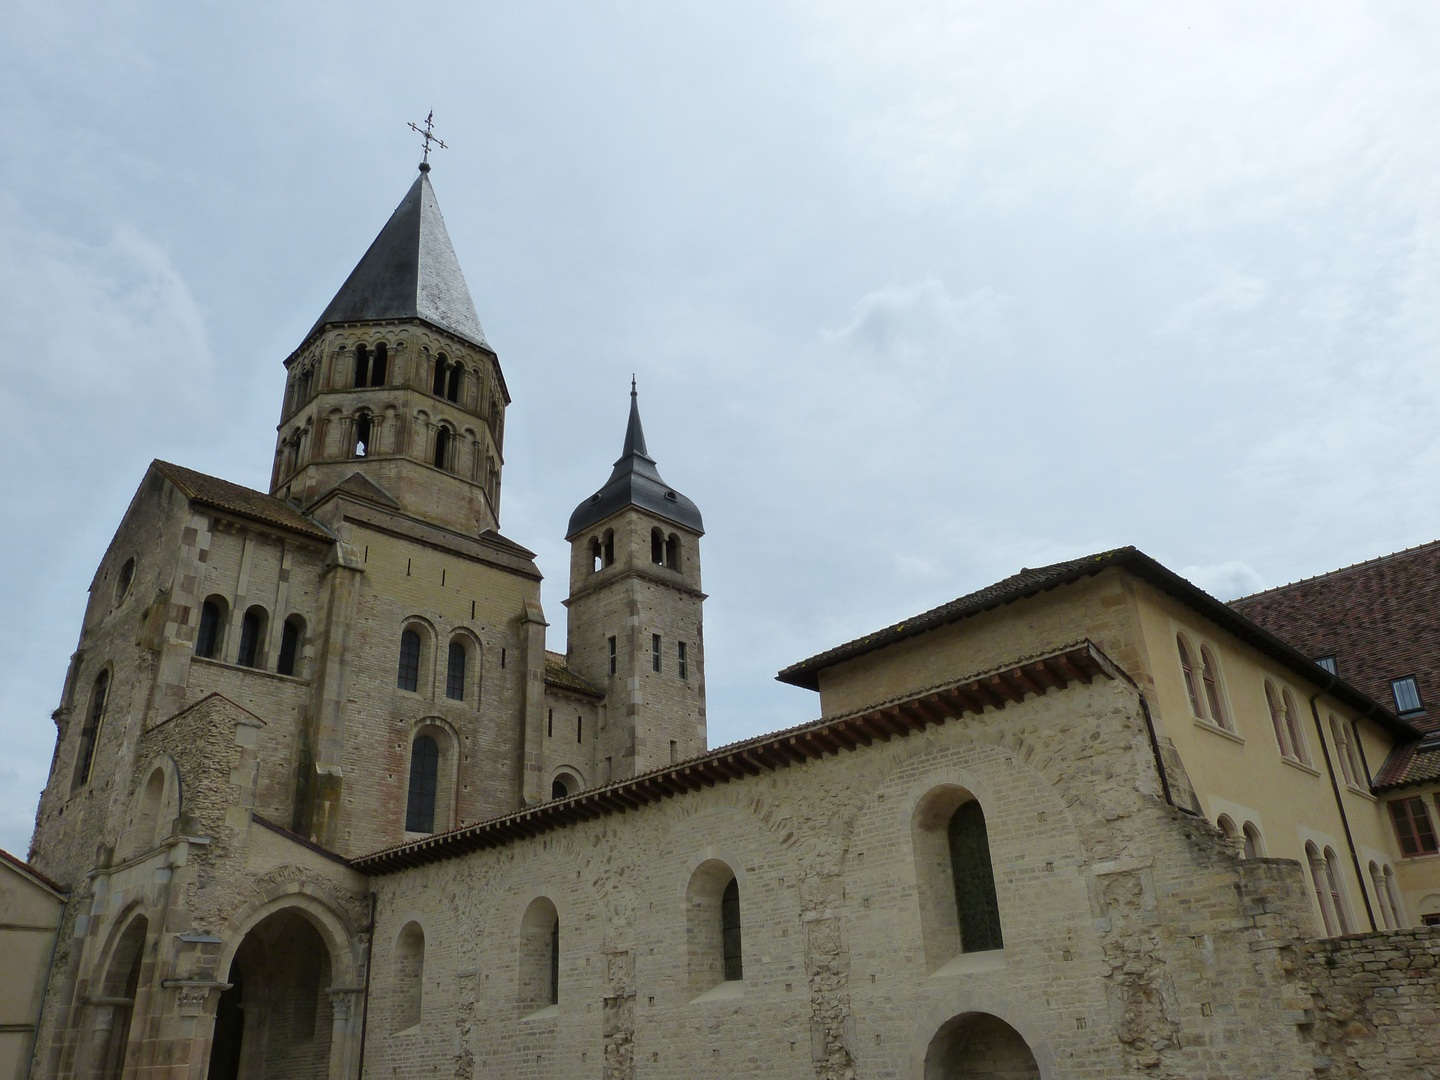 The Romanesque Monastery of Cluny was once the largest church in the world (Internet Photo Source)